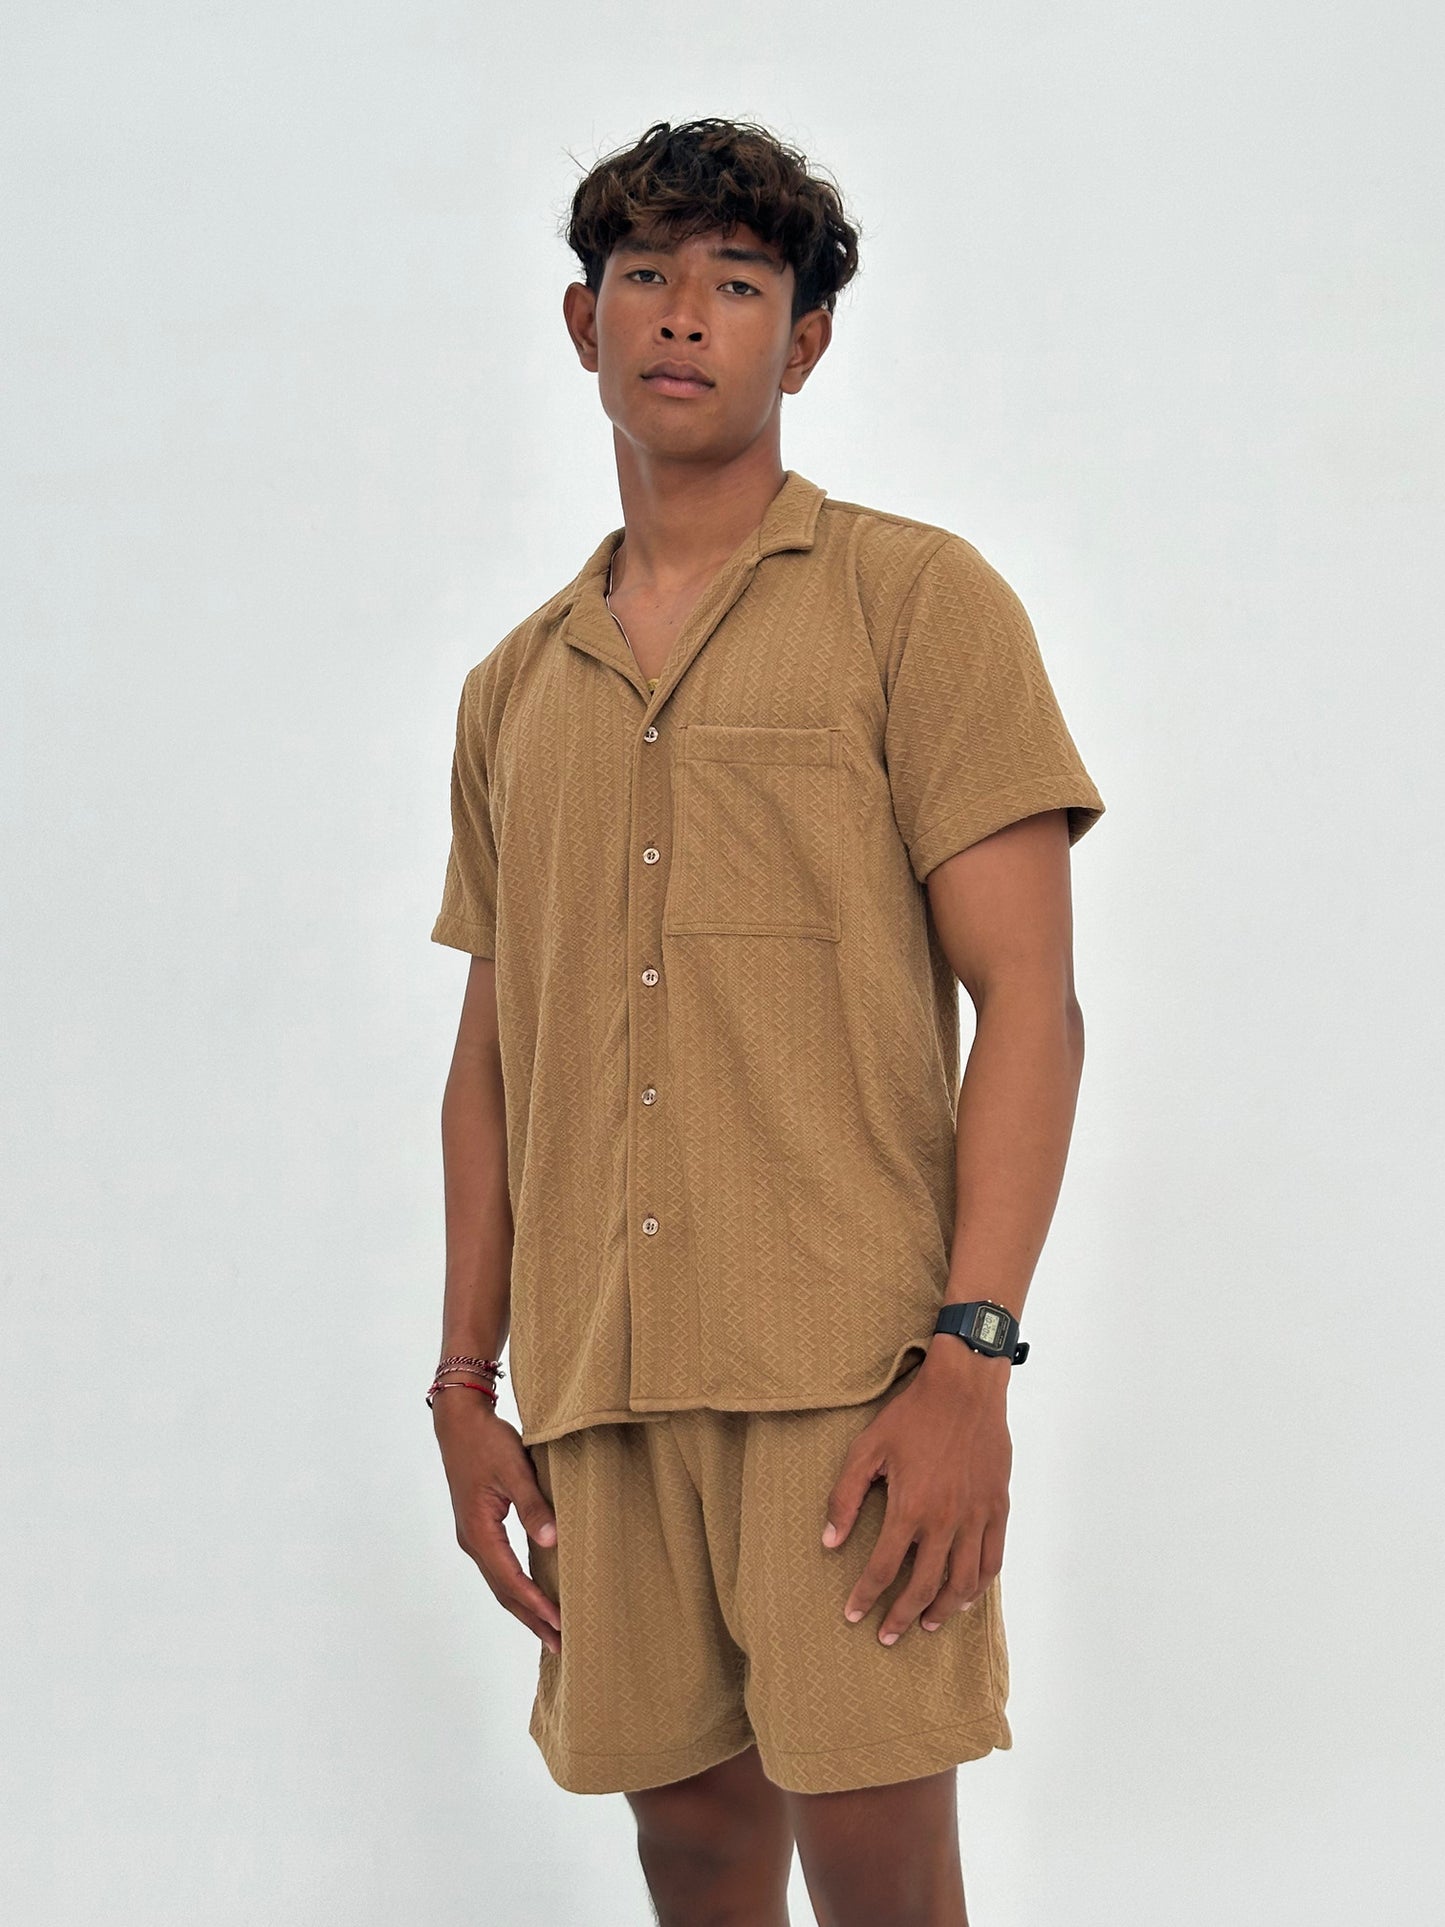 Lembongan Knitted Shirt by Cottonello - Men's Knitted Shirt Short Sleeve